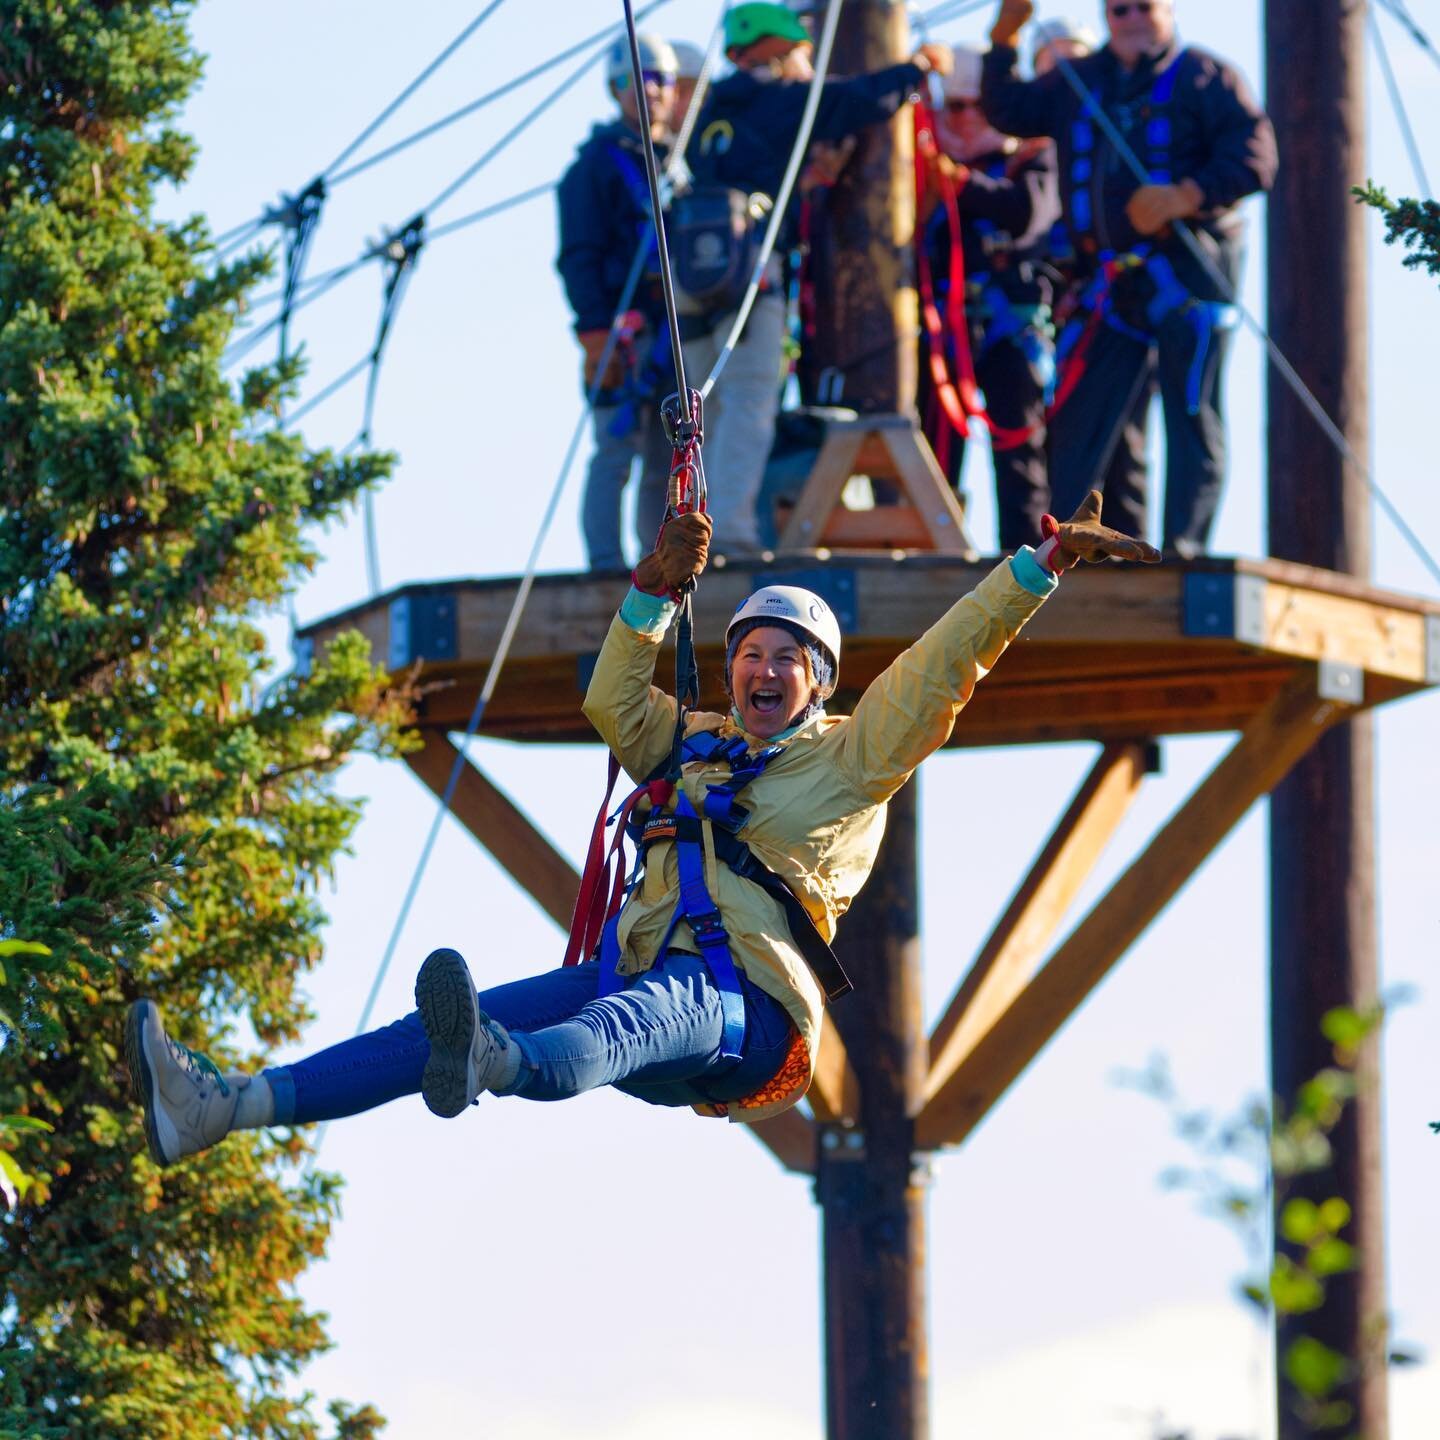 Who do you want to go ziplining with?! Tag them and make your summer plans now! 😎🌞